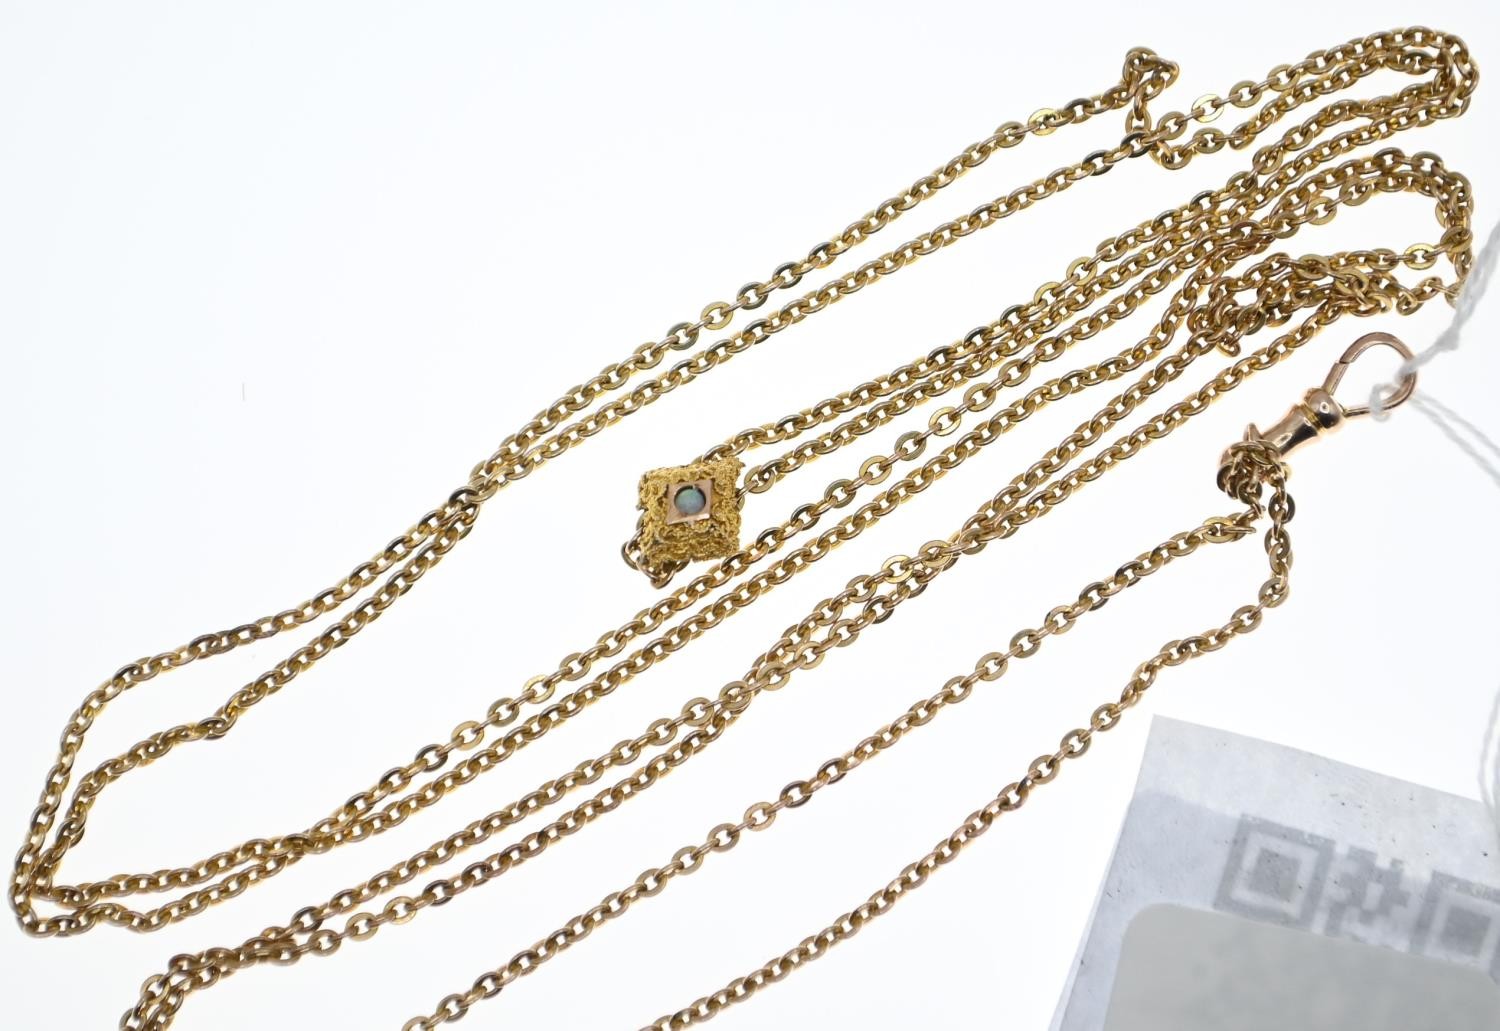 9ct gold double strand watch chain with textured gold opal set pendant, overall length of chain 61cm